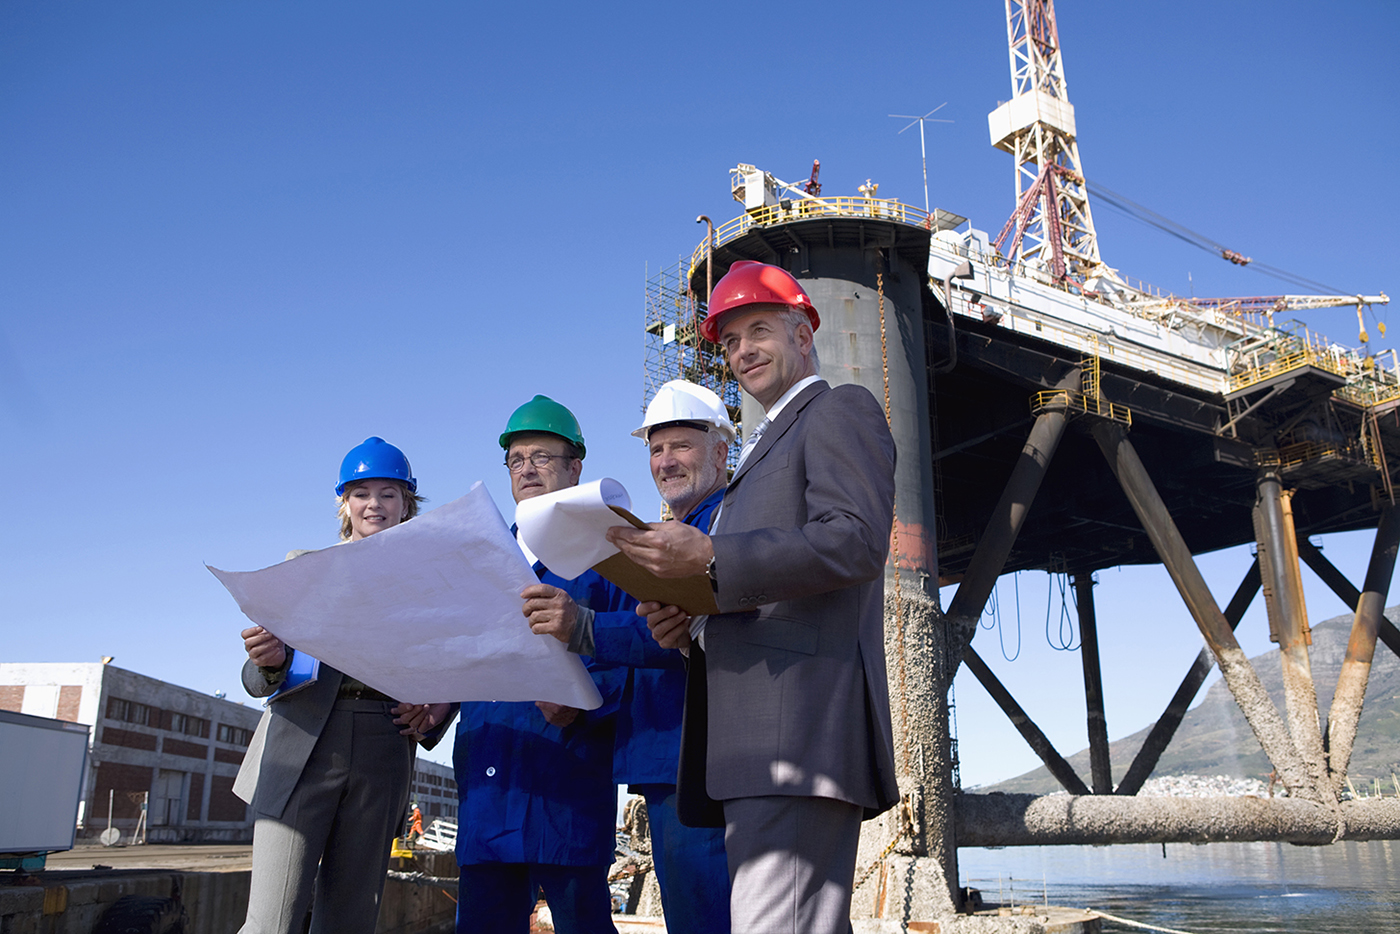 Leadership & Strategic Thinking in the Oil, Gas & Petrochemicals Industry